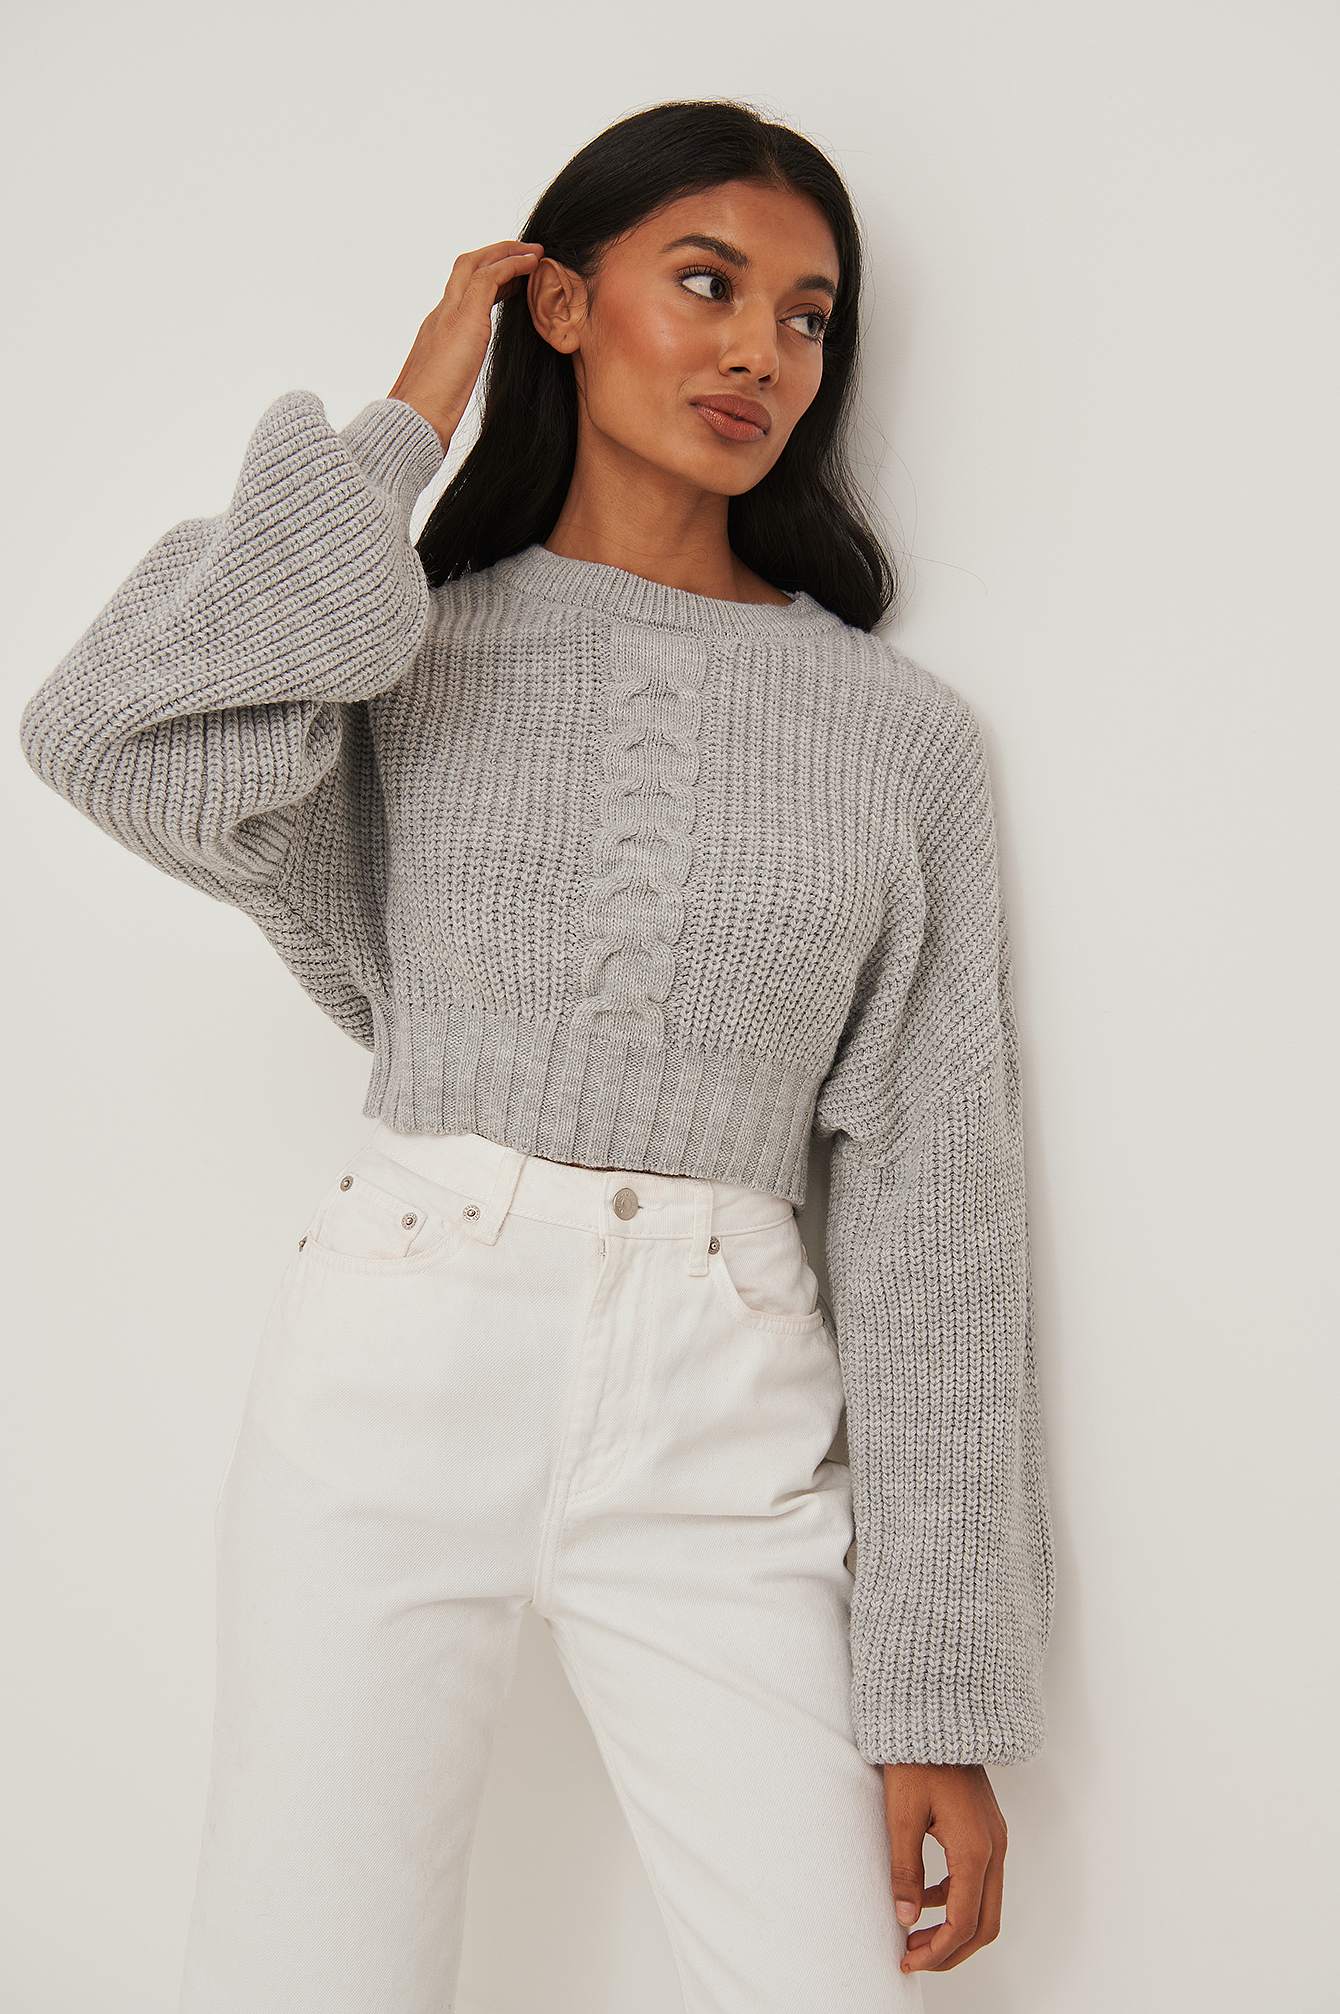 Grey Cropped Cable Knit Sweater